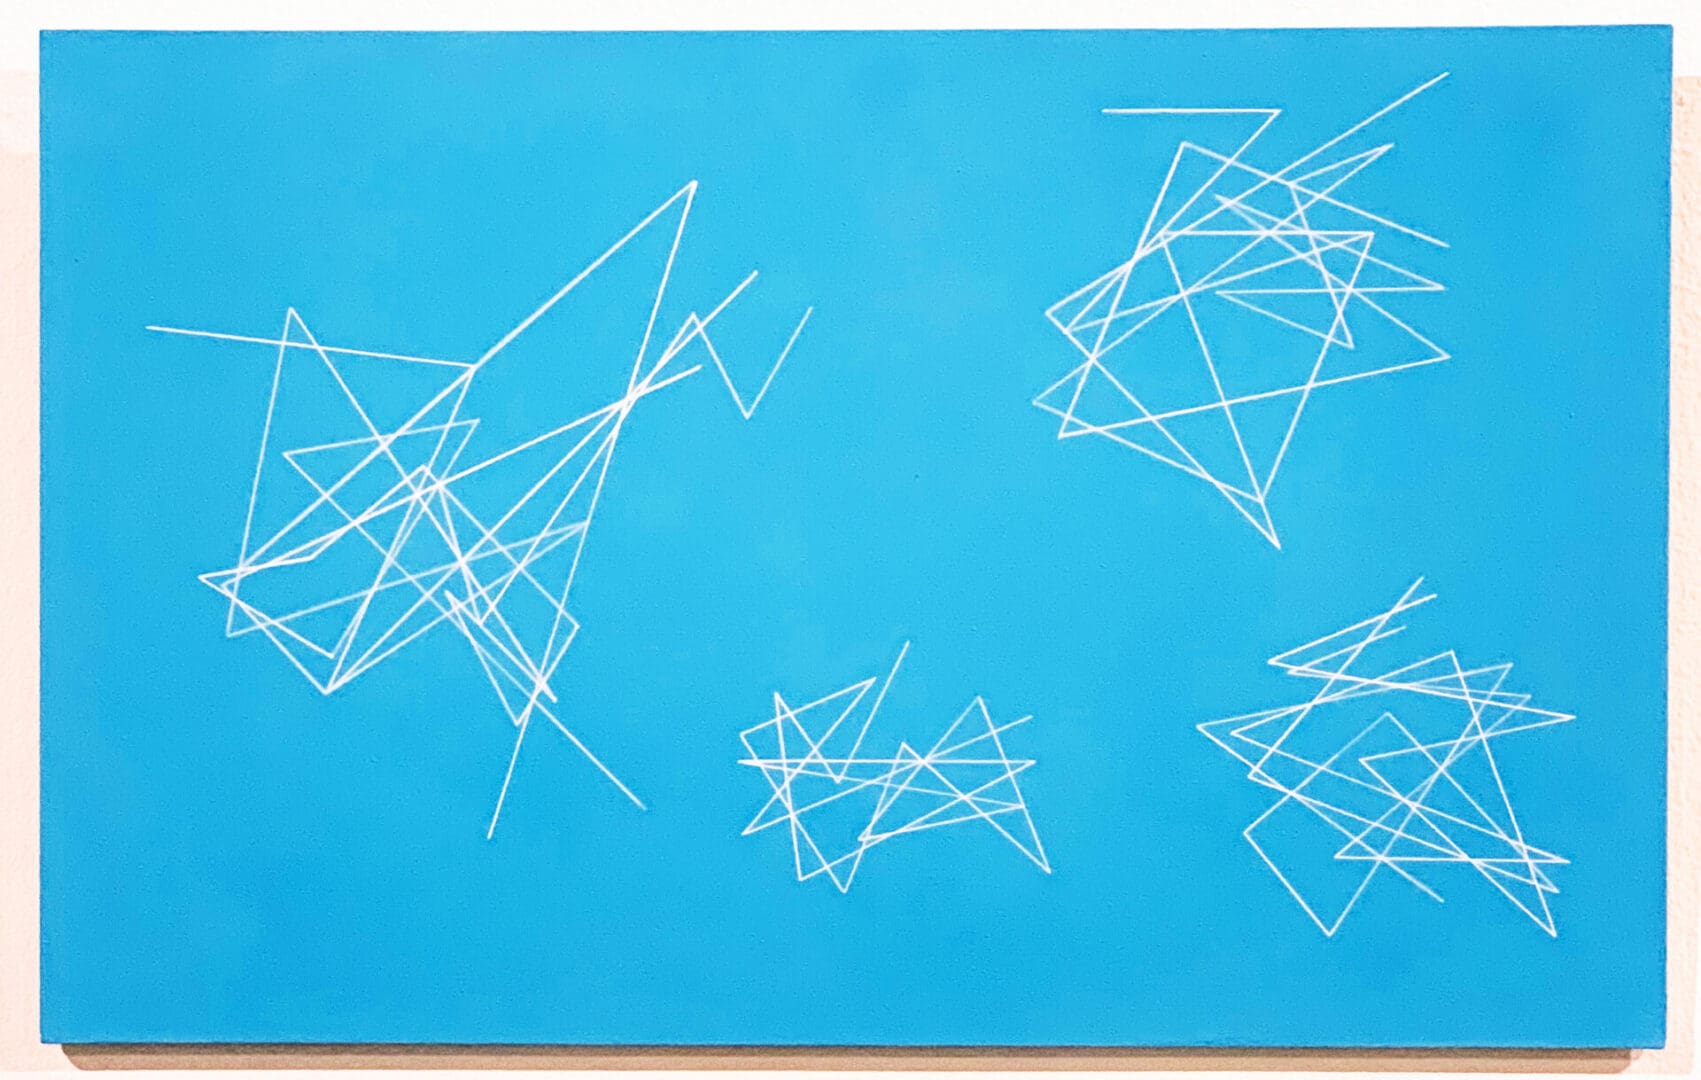 Clifford Singer. Geometrical Clouds. 1977. 21.5 x 36 inches. Acrylic on Canvas.  [WHITE LINES HAND PAINTED WITH GOUACHE USING SABLE BRUSH].